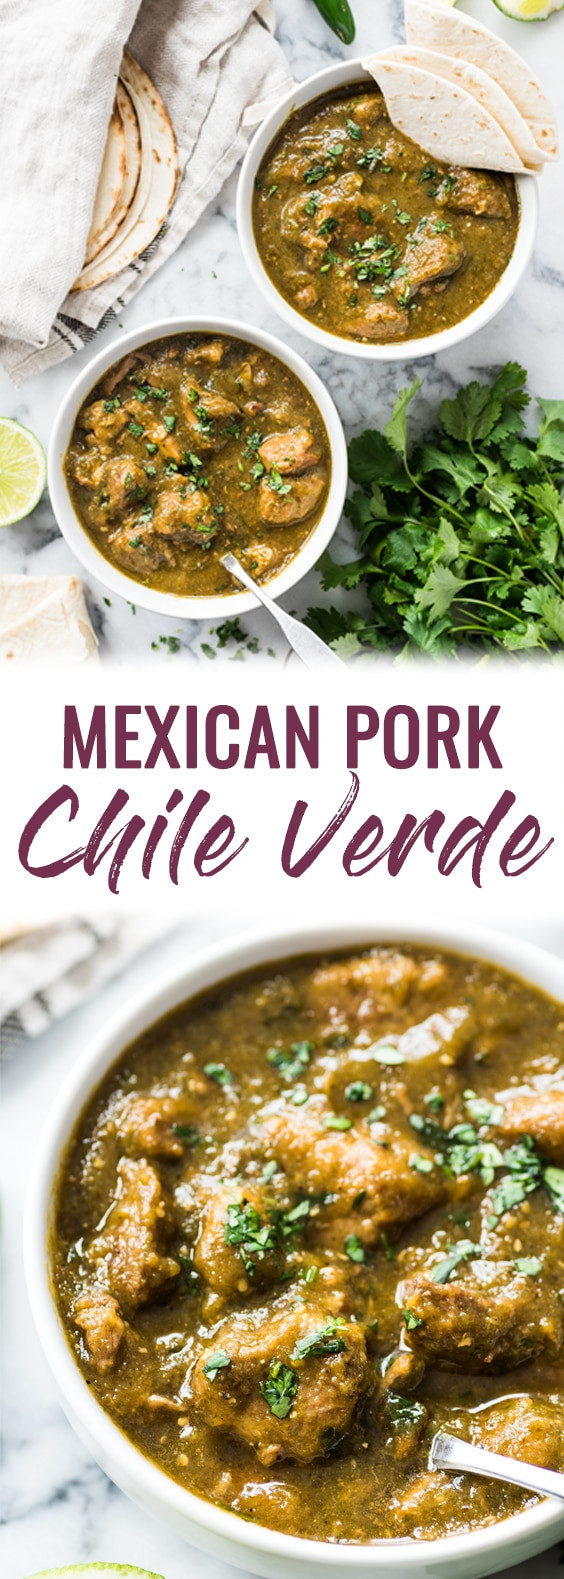 Authentic Mexican Pork Recipes
 Mexican Pork Chile Verde Isabel Eats